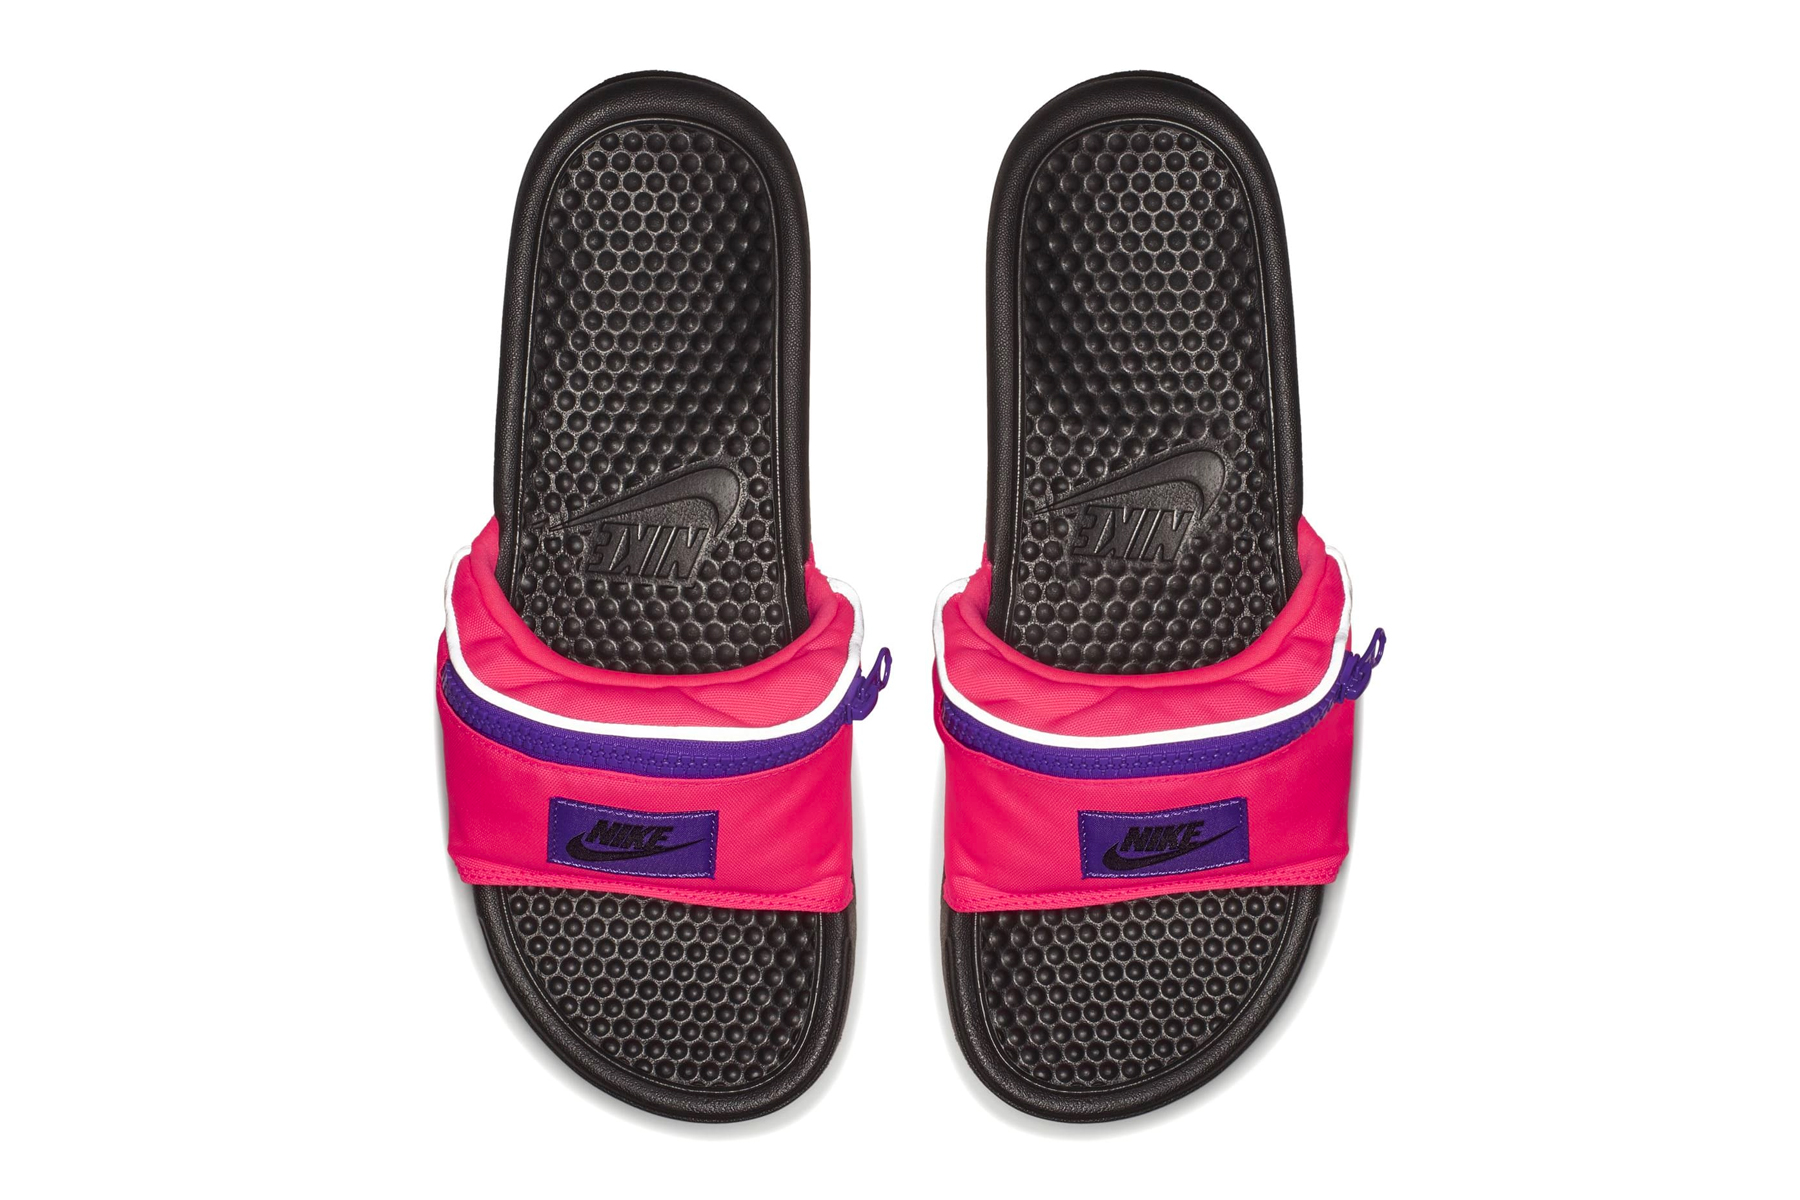 nike sandals with zipper pouch